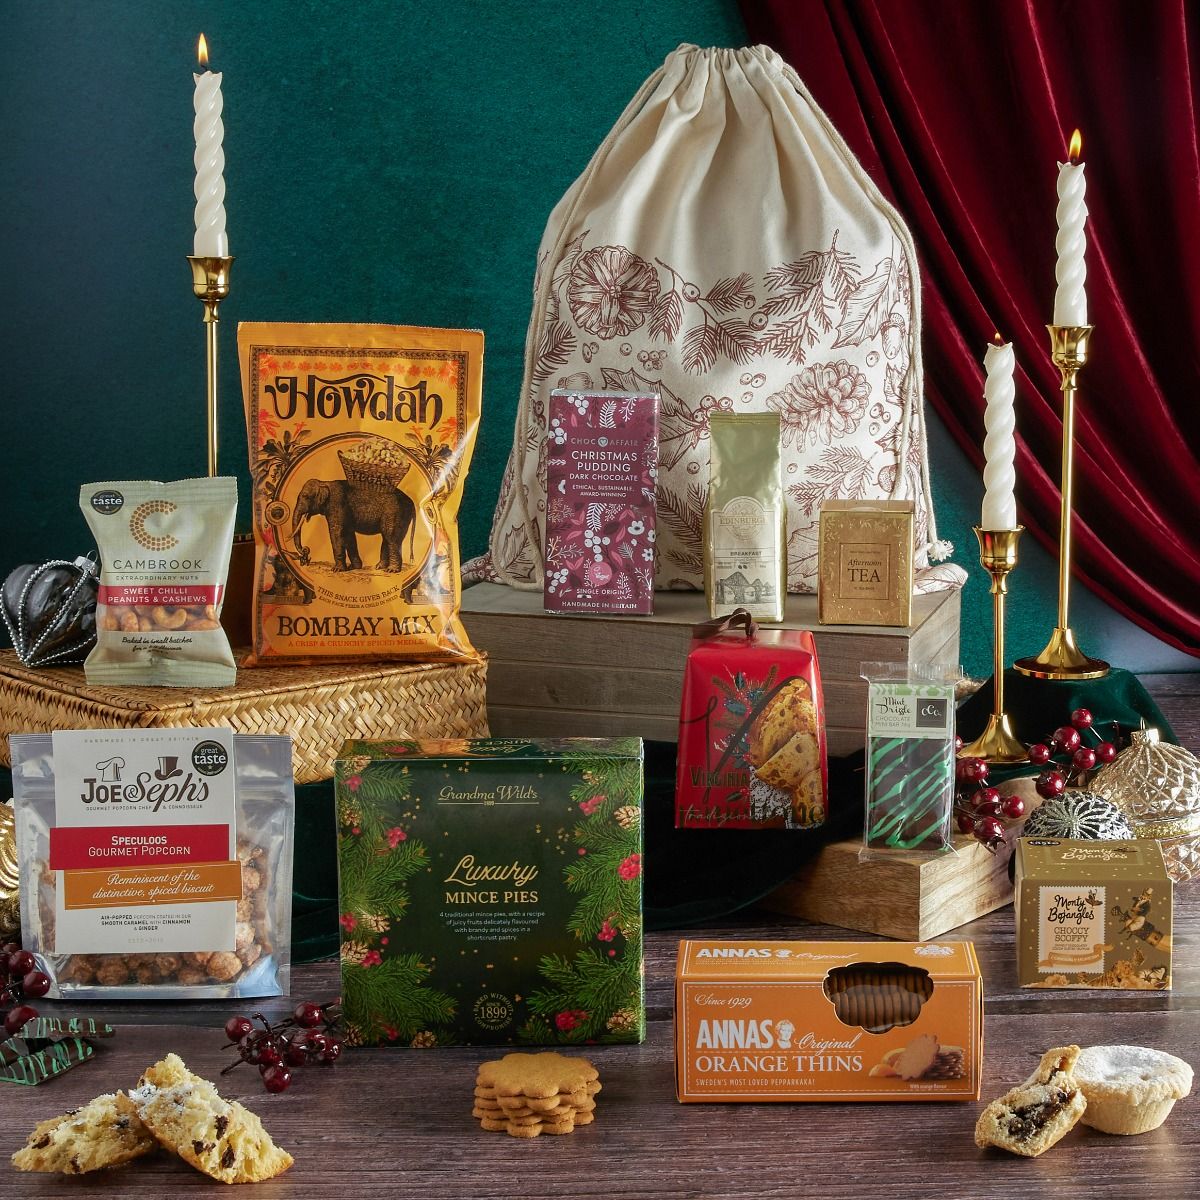 The Festive Favourites Hamper with contents on display